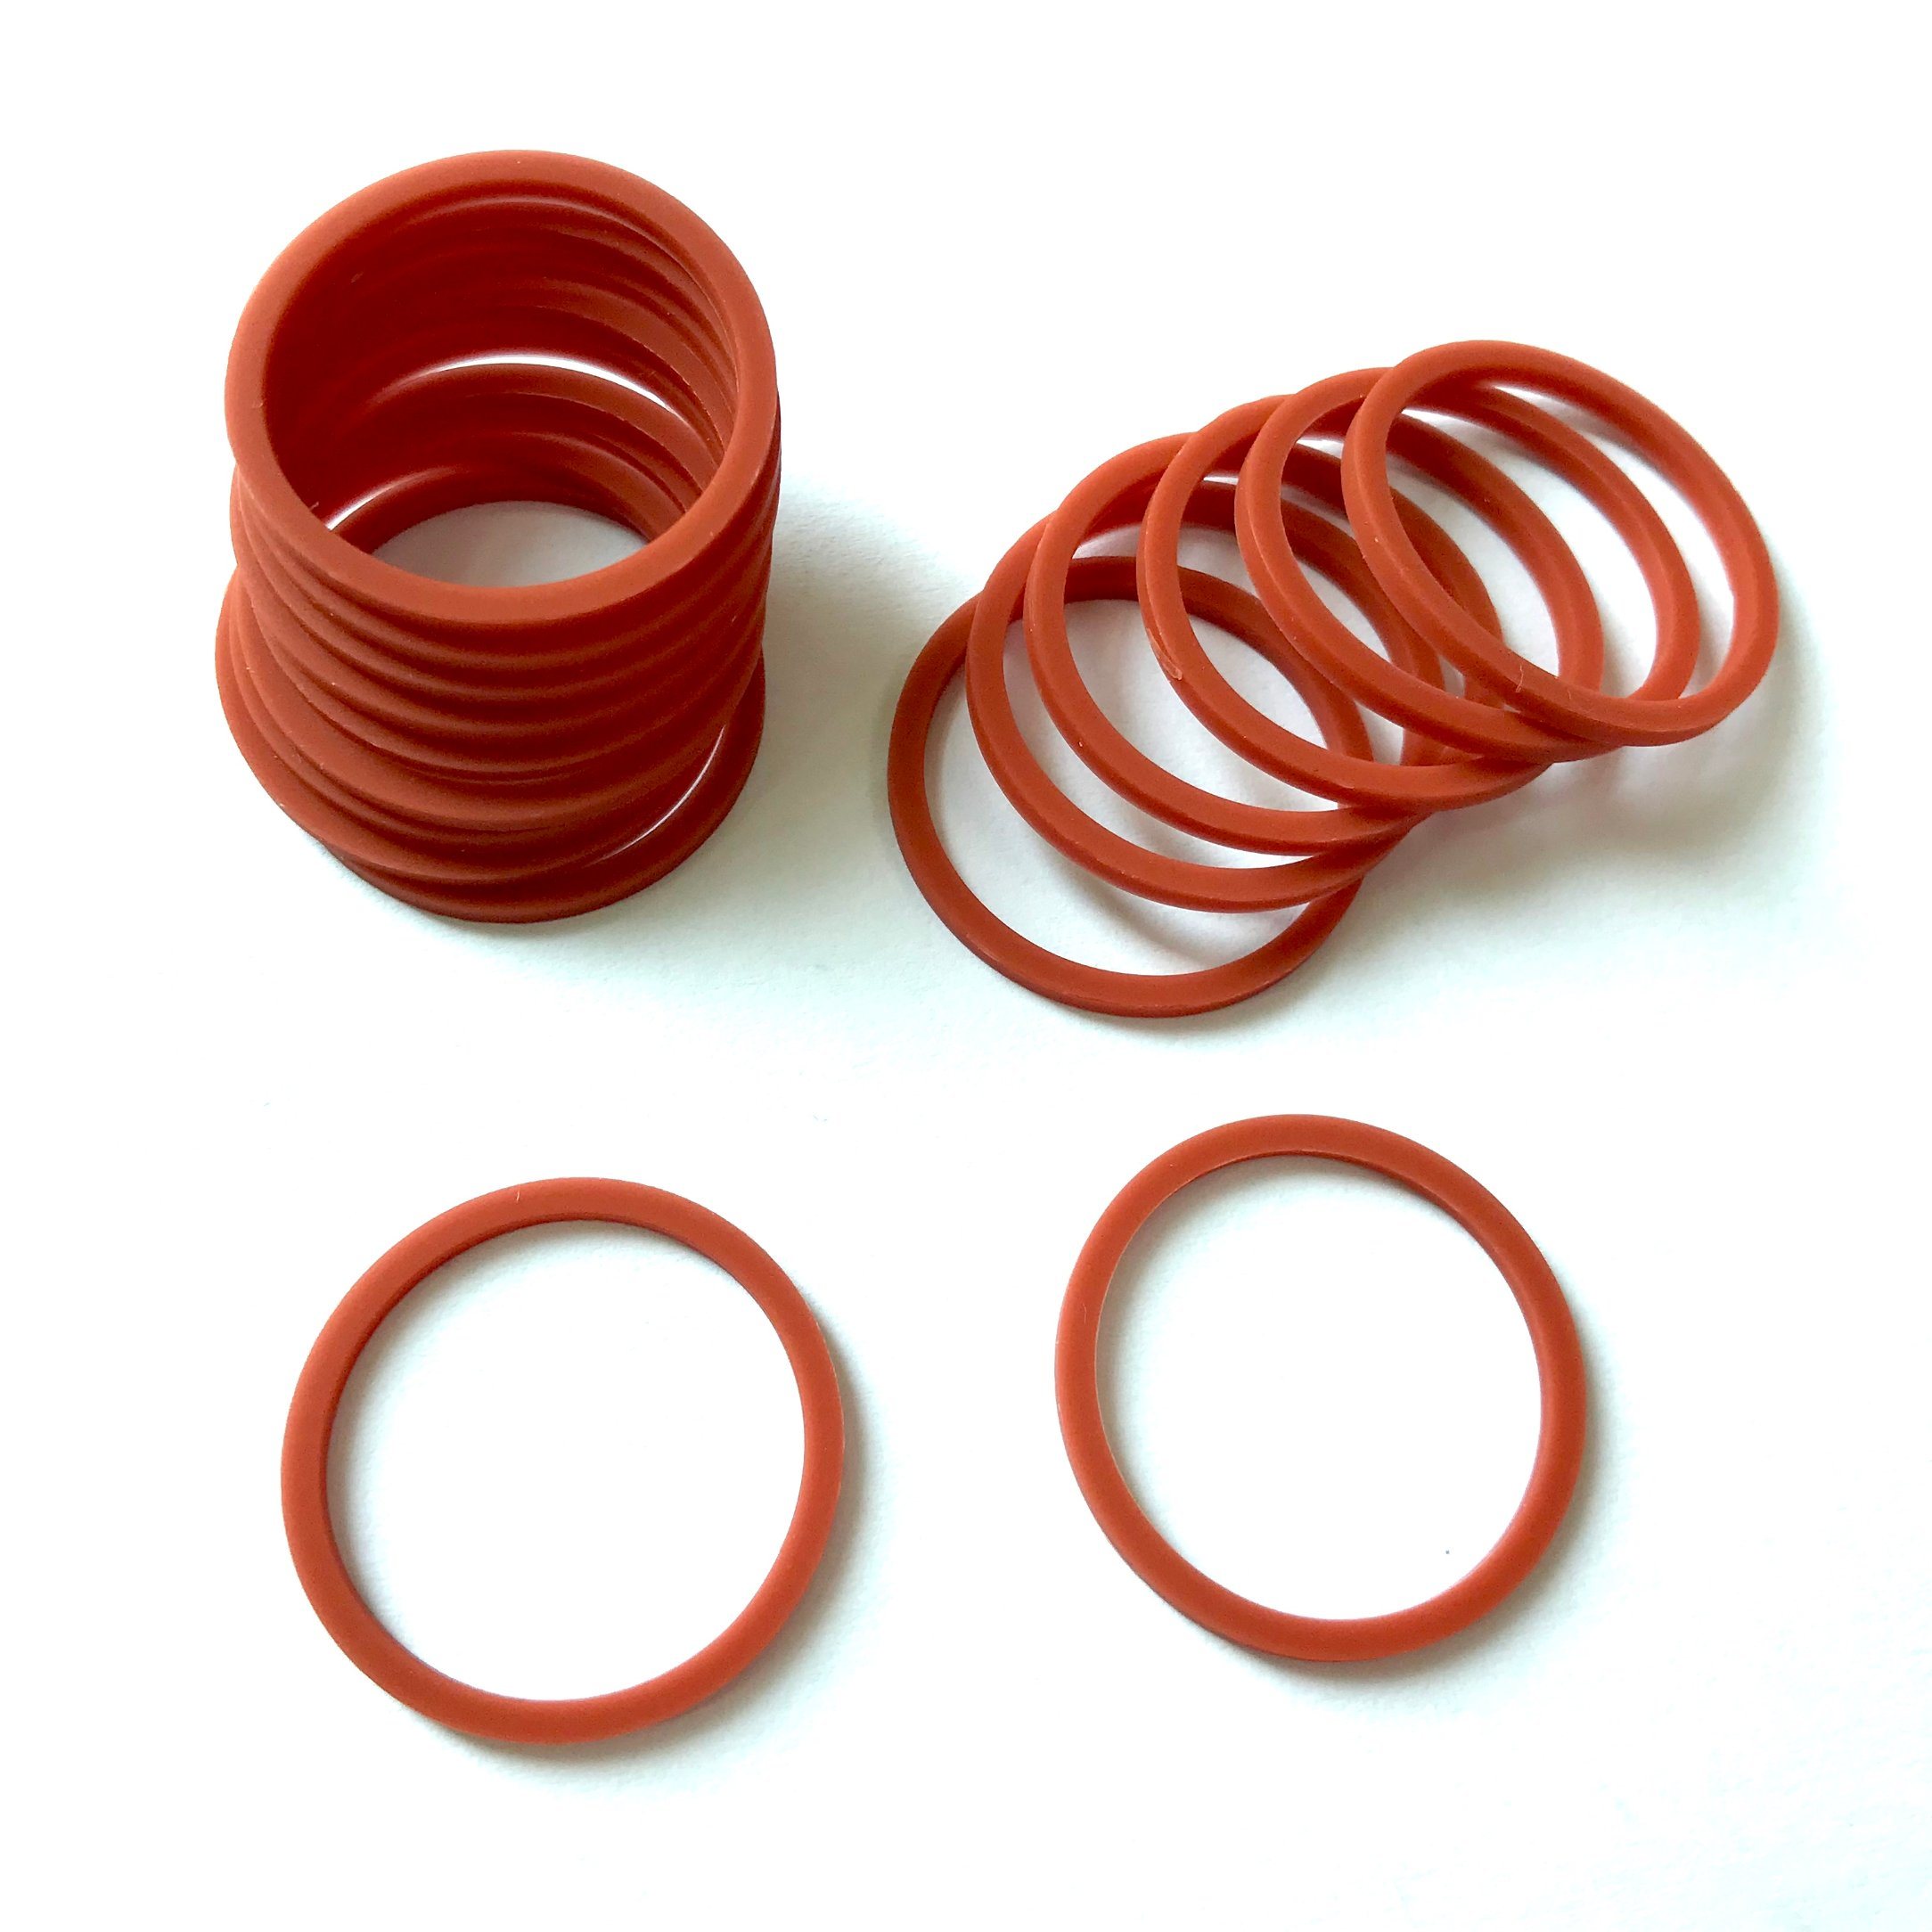 Automobile Engine Parts Silicone Rubber Seal Gasket